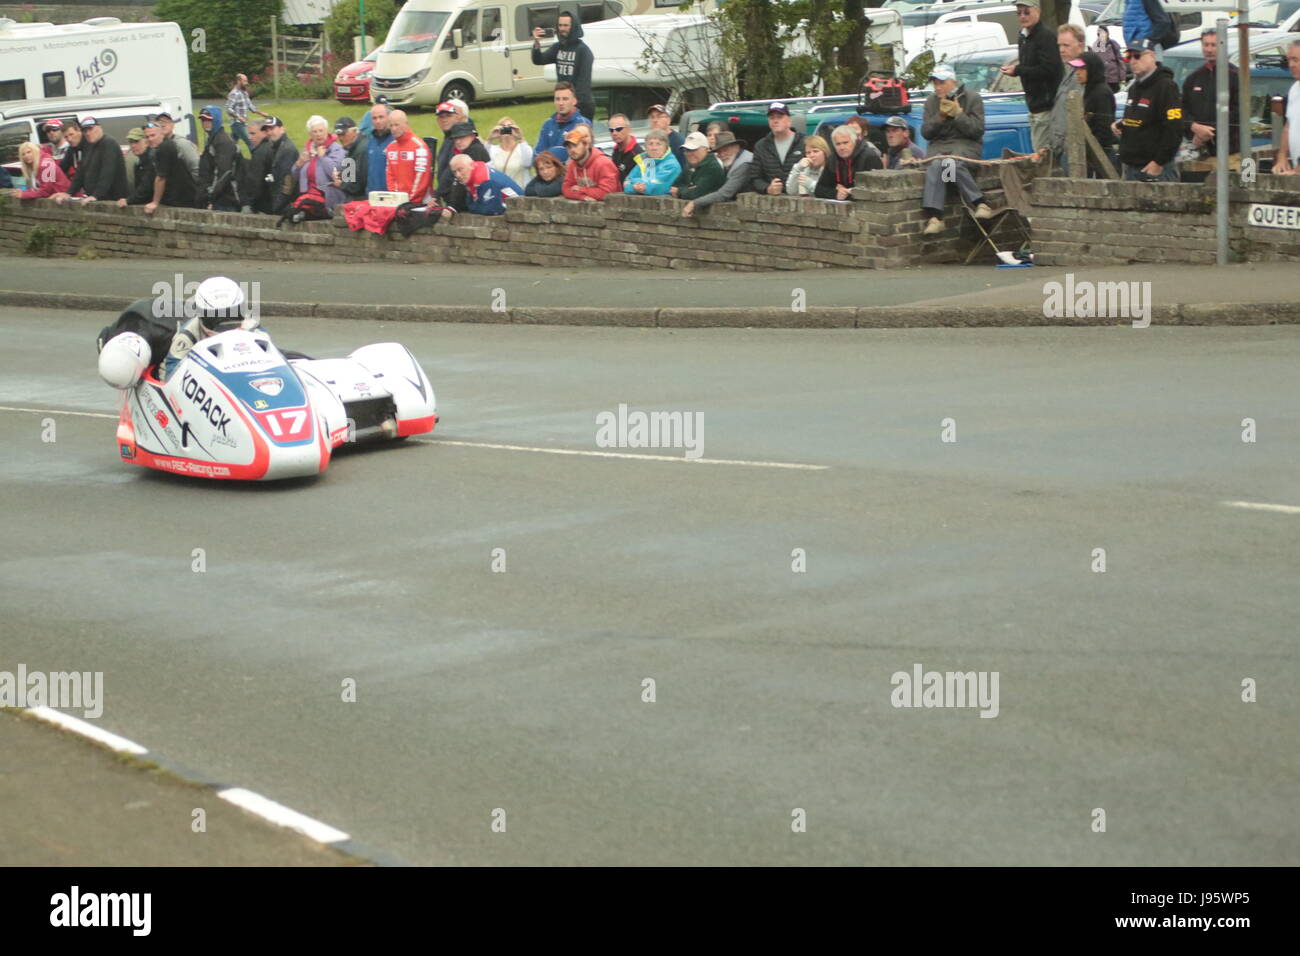 Ramsey, UK. 5th Jun, 2017. Isle of Man TT Races, Sure Sidecar Race. Number 17, Mike Roscher and Ben Hughes on their 600cc LCR Suzuki sidecar from the Roscher Racing by Penz13.com team from Germany, at Cruickshanks Corner, Ramsey, Isle of Man. Credit: Louisa Jane Bawden/Alamy Live News. Stock Photo